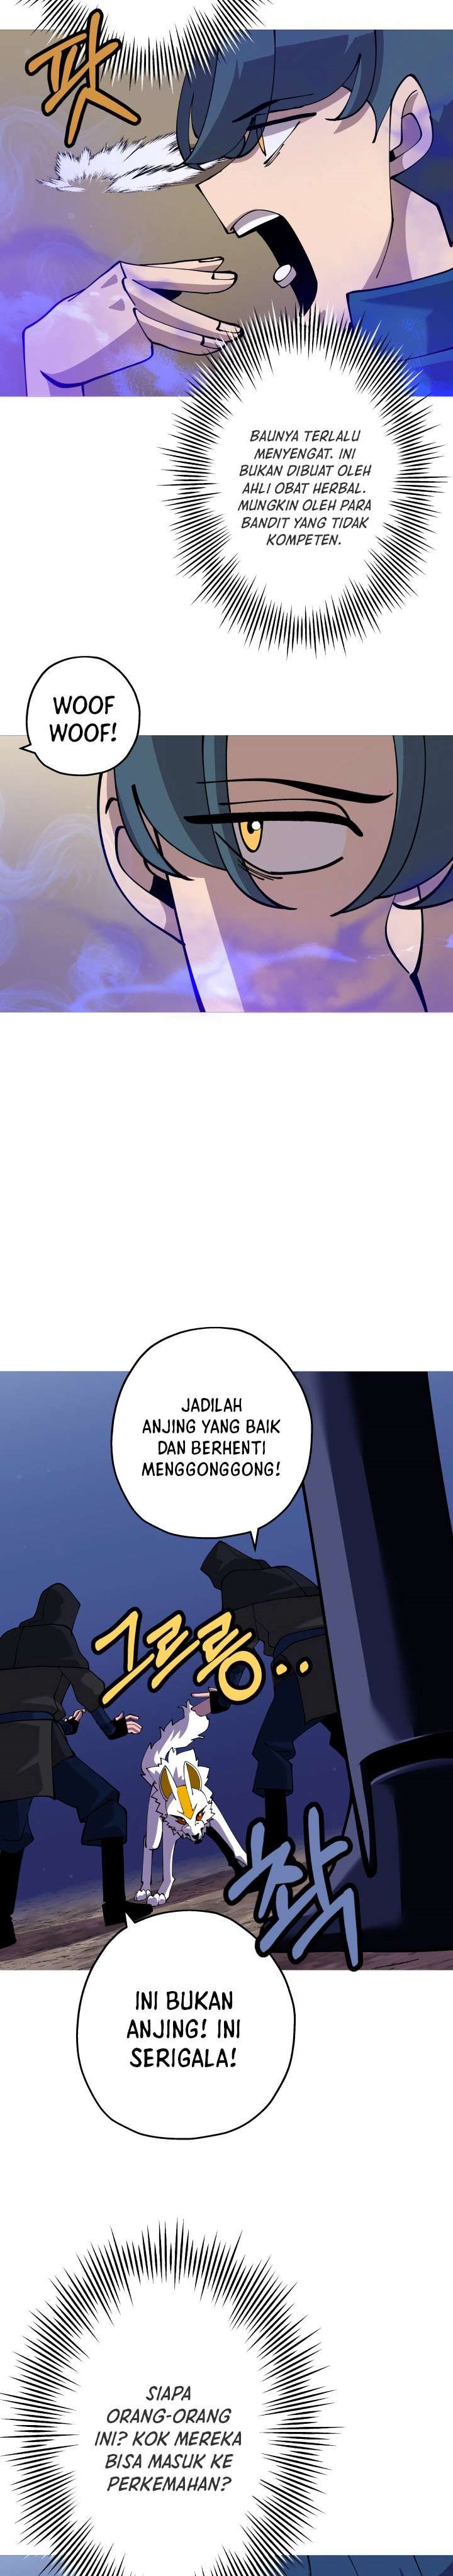 Dilarang COPAS - situs resmi www.mangacanblog.com - Komik the story of a low rank soldier becoming a monarch 026 - chapter 26 27 Indonesia the story of a low rank soldier becoming a monarch 026 - chapter 26 Terbaru 22|Baca Manga Komik Indonesia|Mangacan